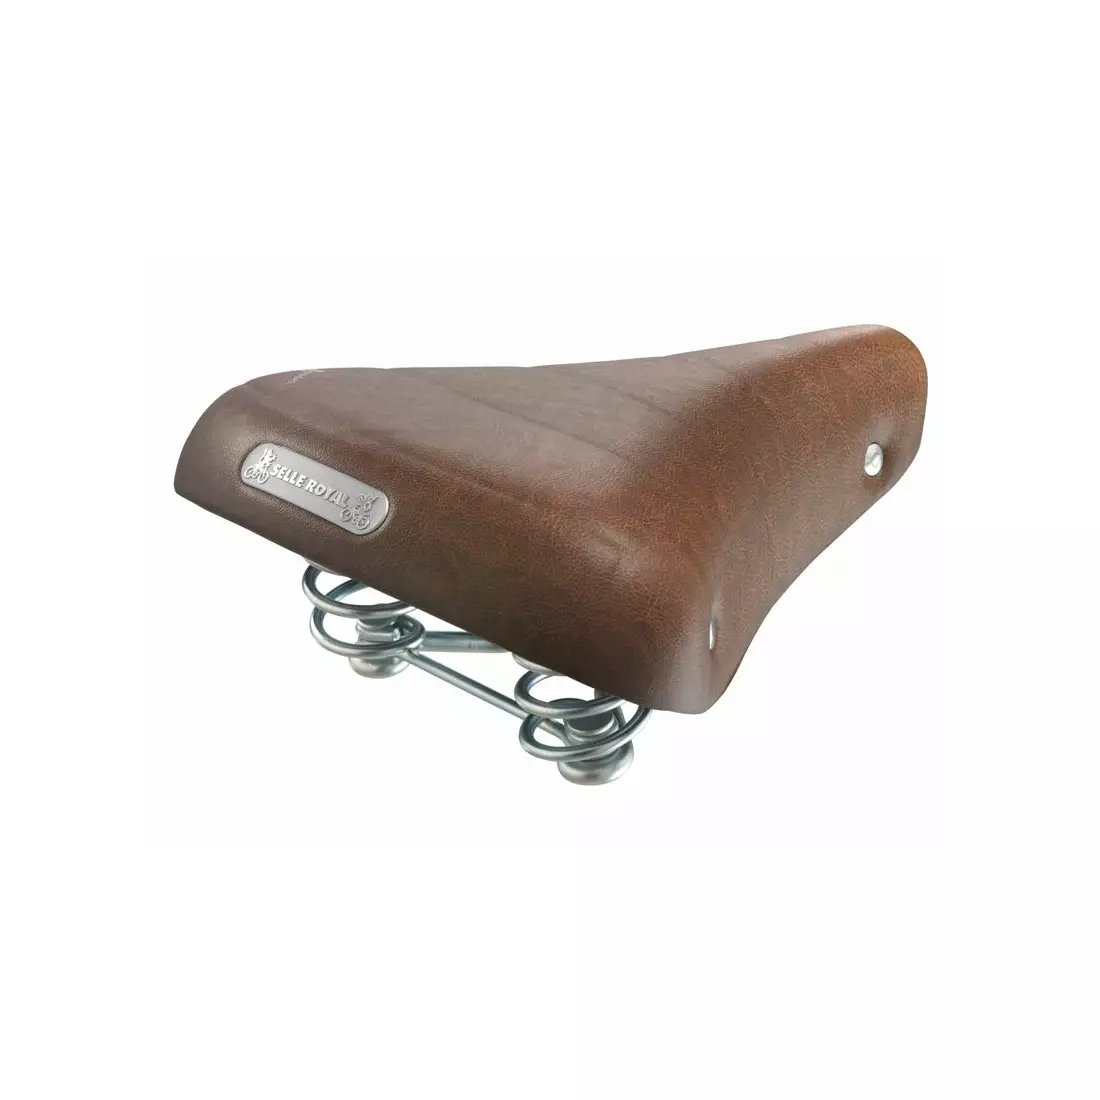 SELLEROYAL CLASSIC RELAXED bicycle saddle 90st. ONDINA BROWN unisex gel+ springs SR-8171USA38129